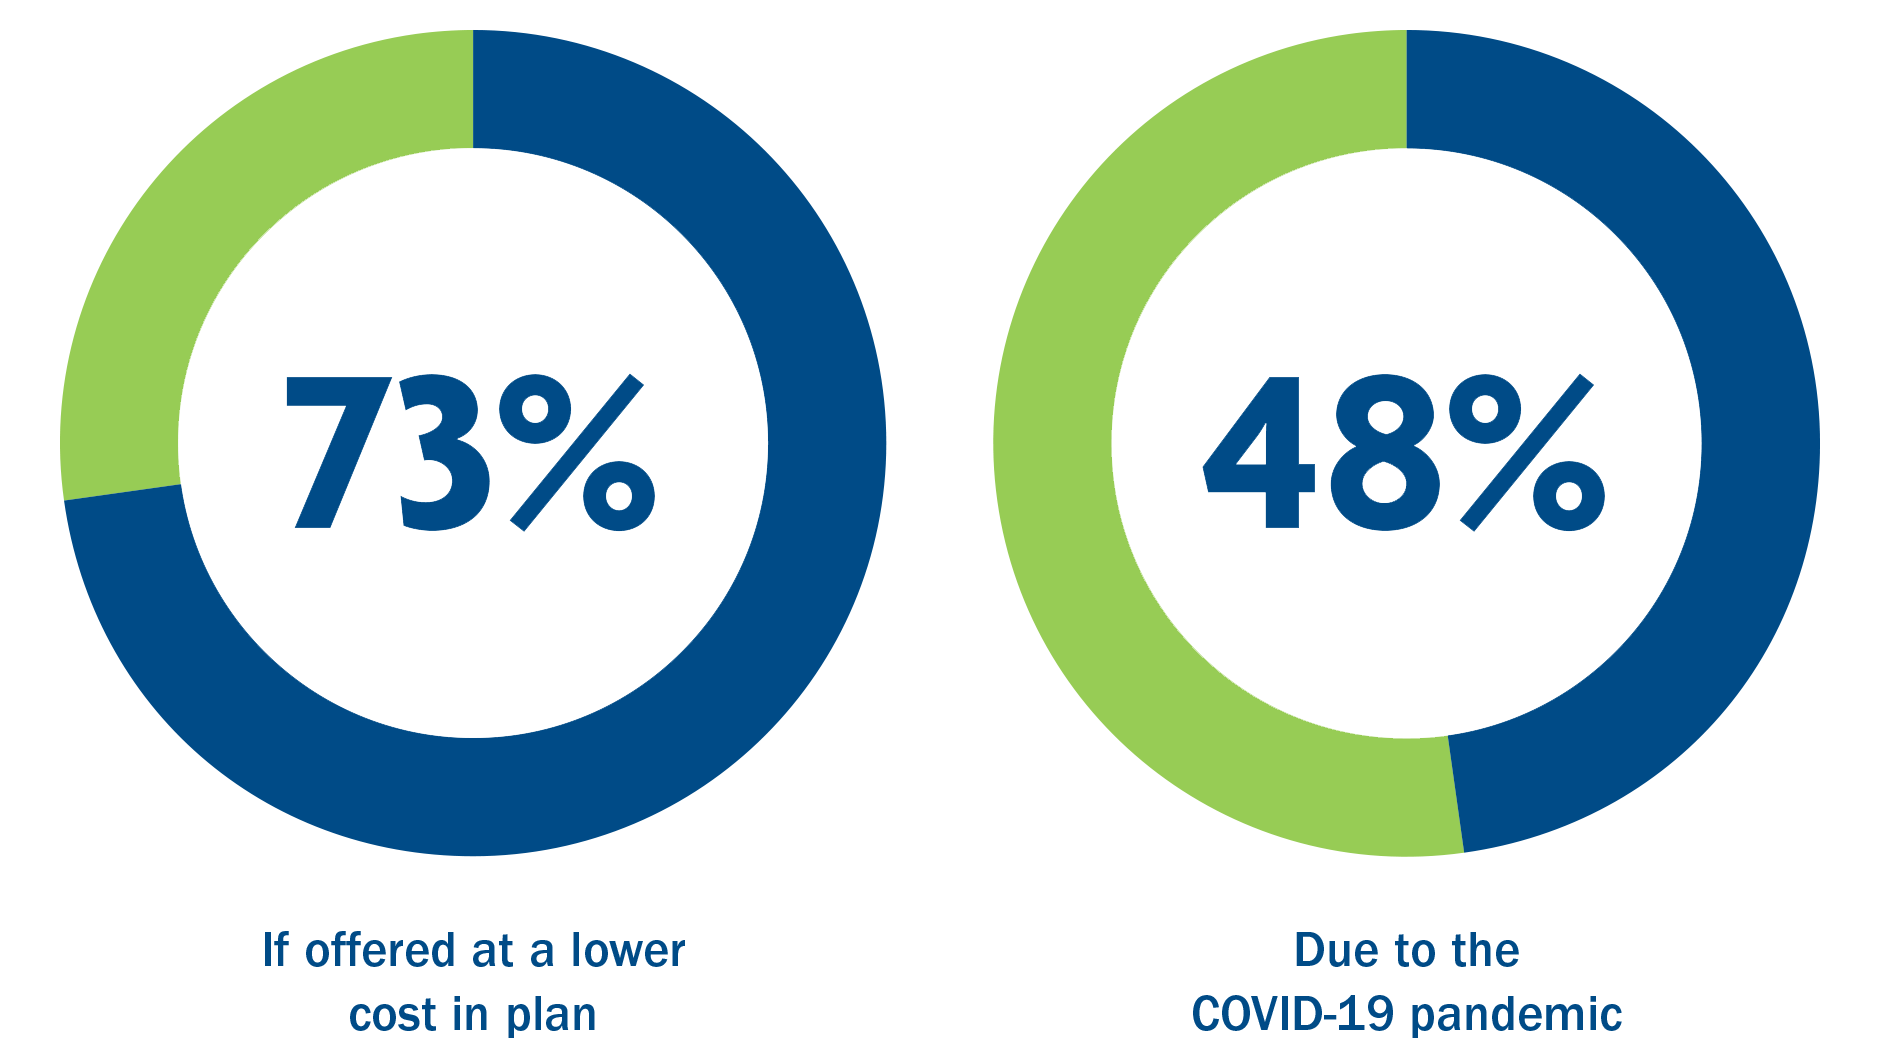 Interest in in-plan GLI annuities jumps from 54% to 73% when cost is lower than retail. 48% report that interest in GLI is due to the pandemic.